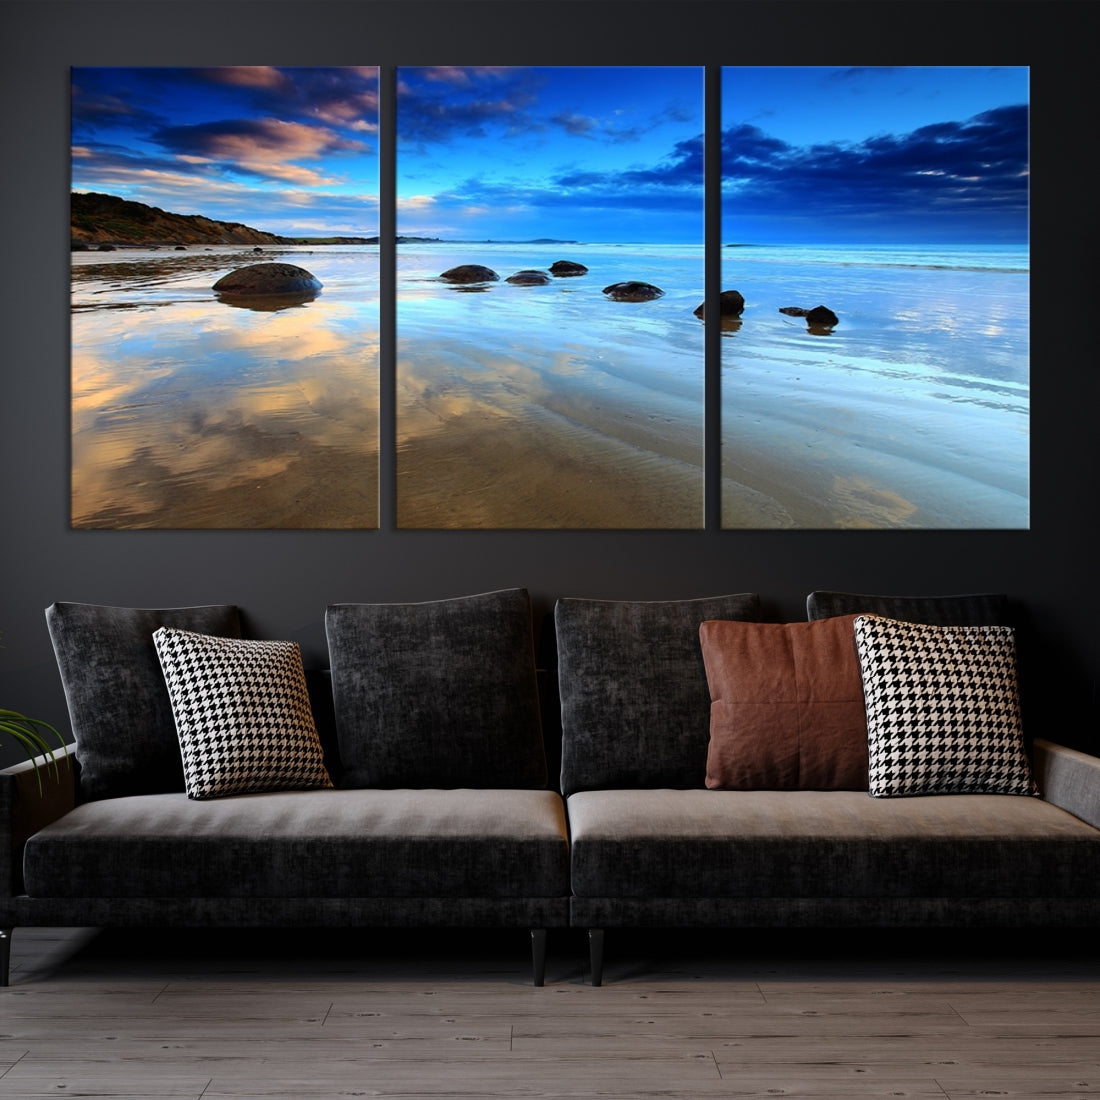 67116 - Wonderful Beach Landscape with Mountain View at Dusk Canvas Print